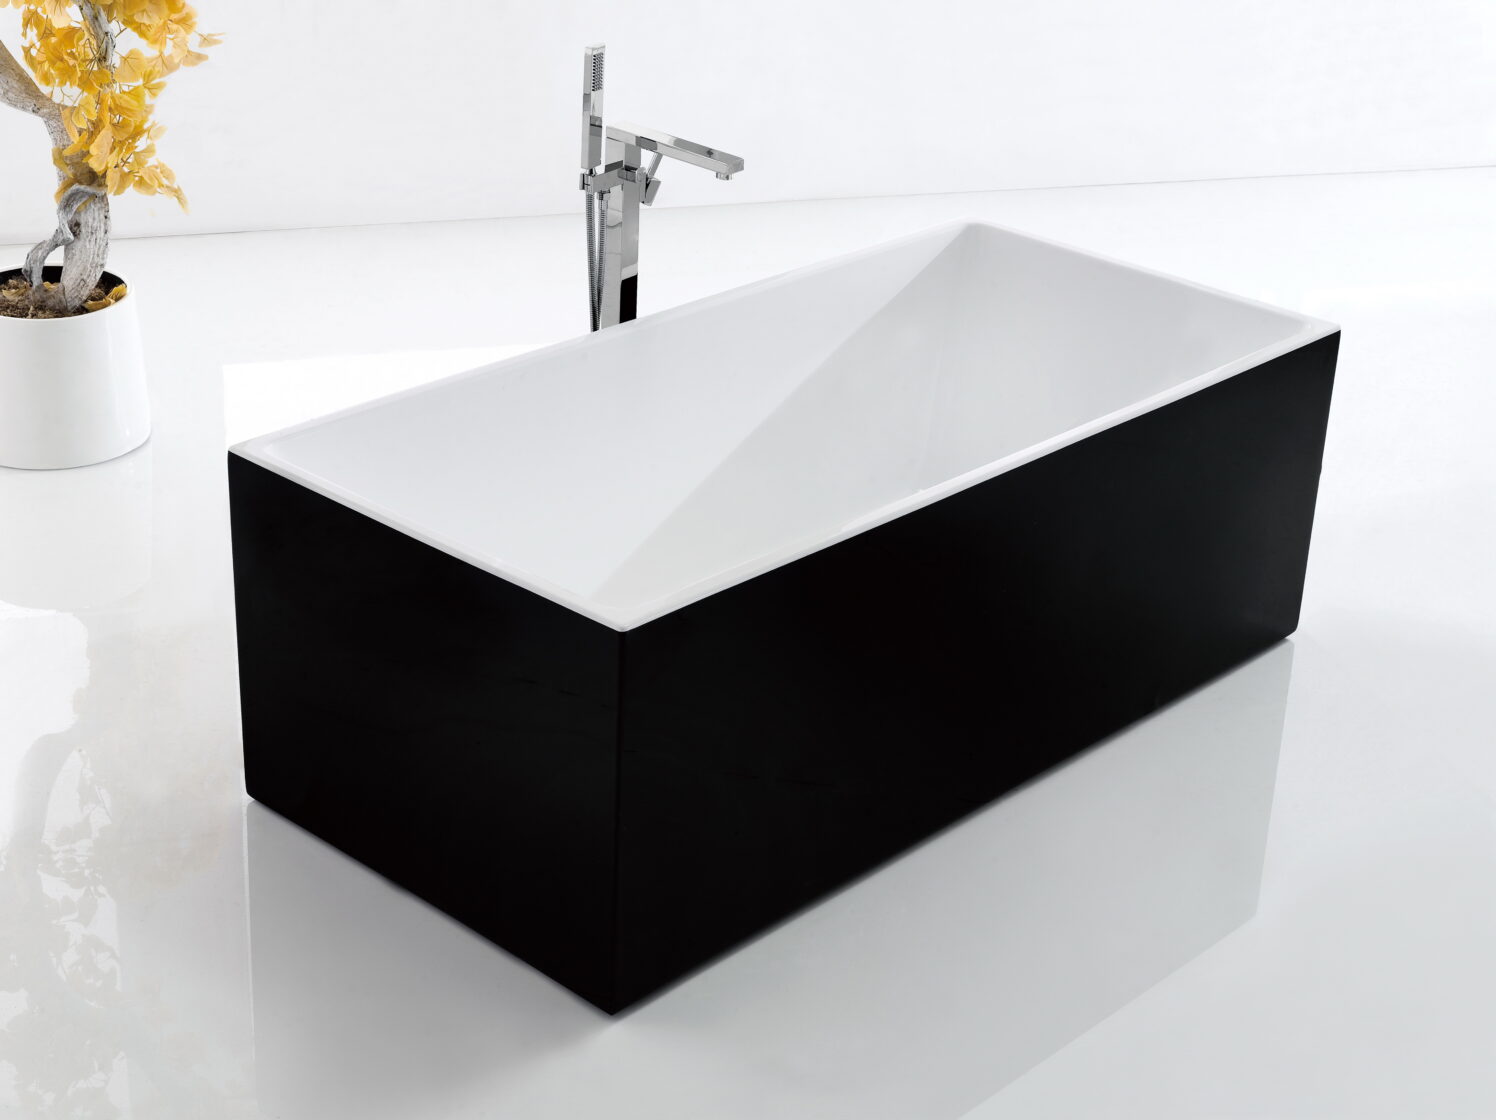 RIVA AMBER FREESTANDING BATHTUB GLOSS BLACK AND WHITE (AVAILABLE IN 1500MM AND 1700MM)